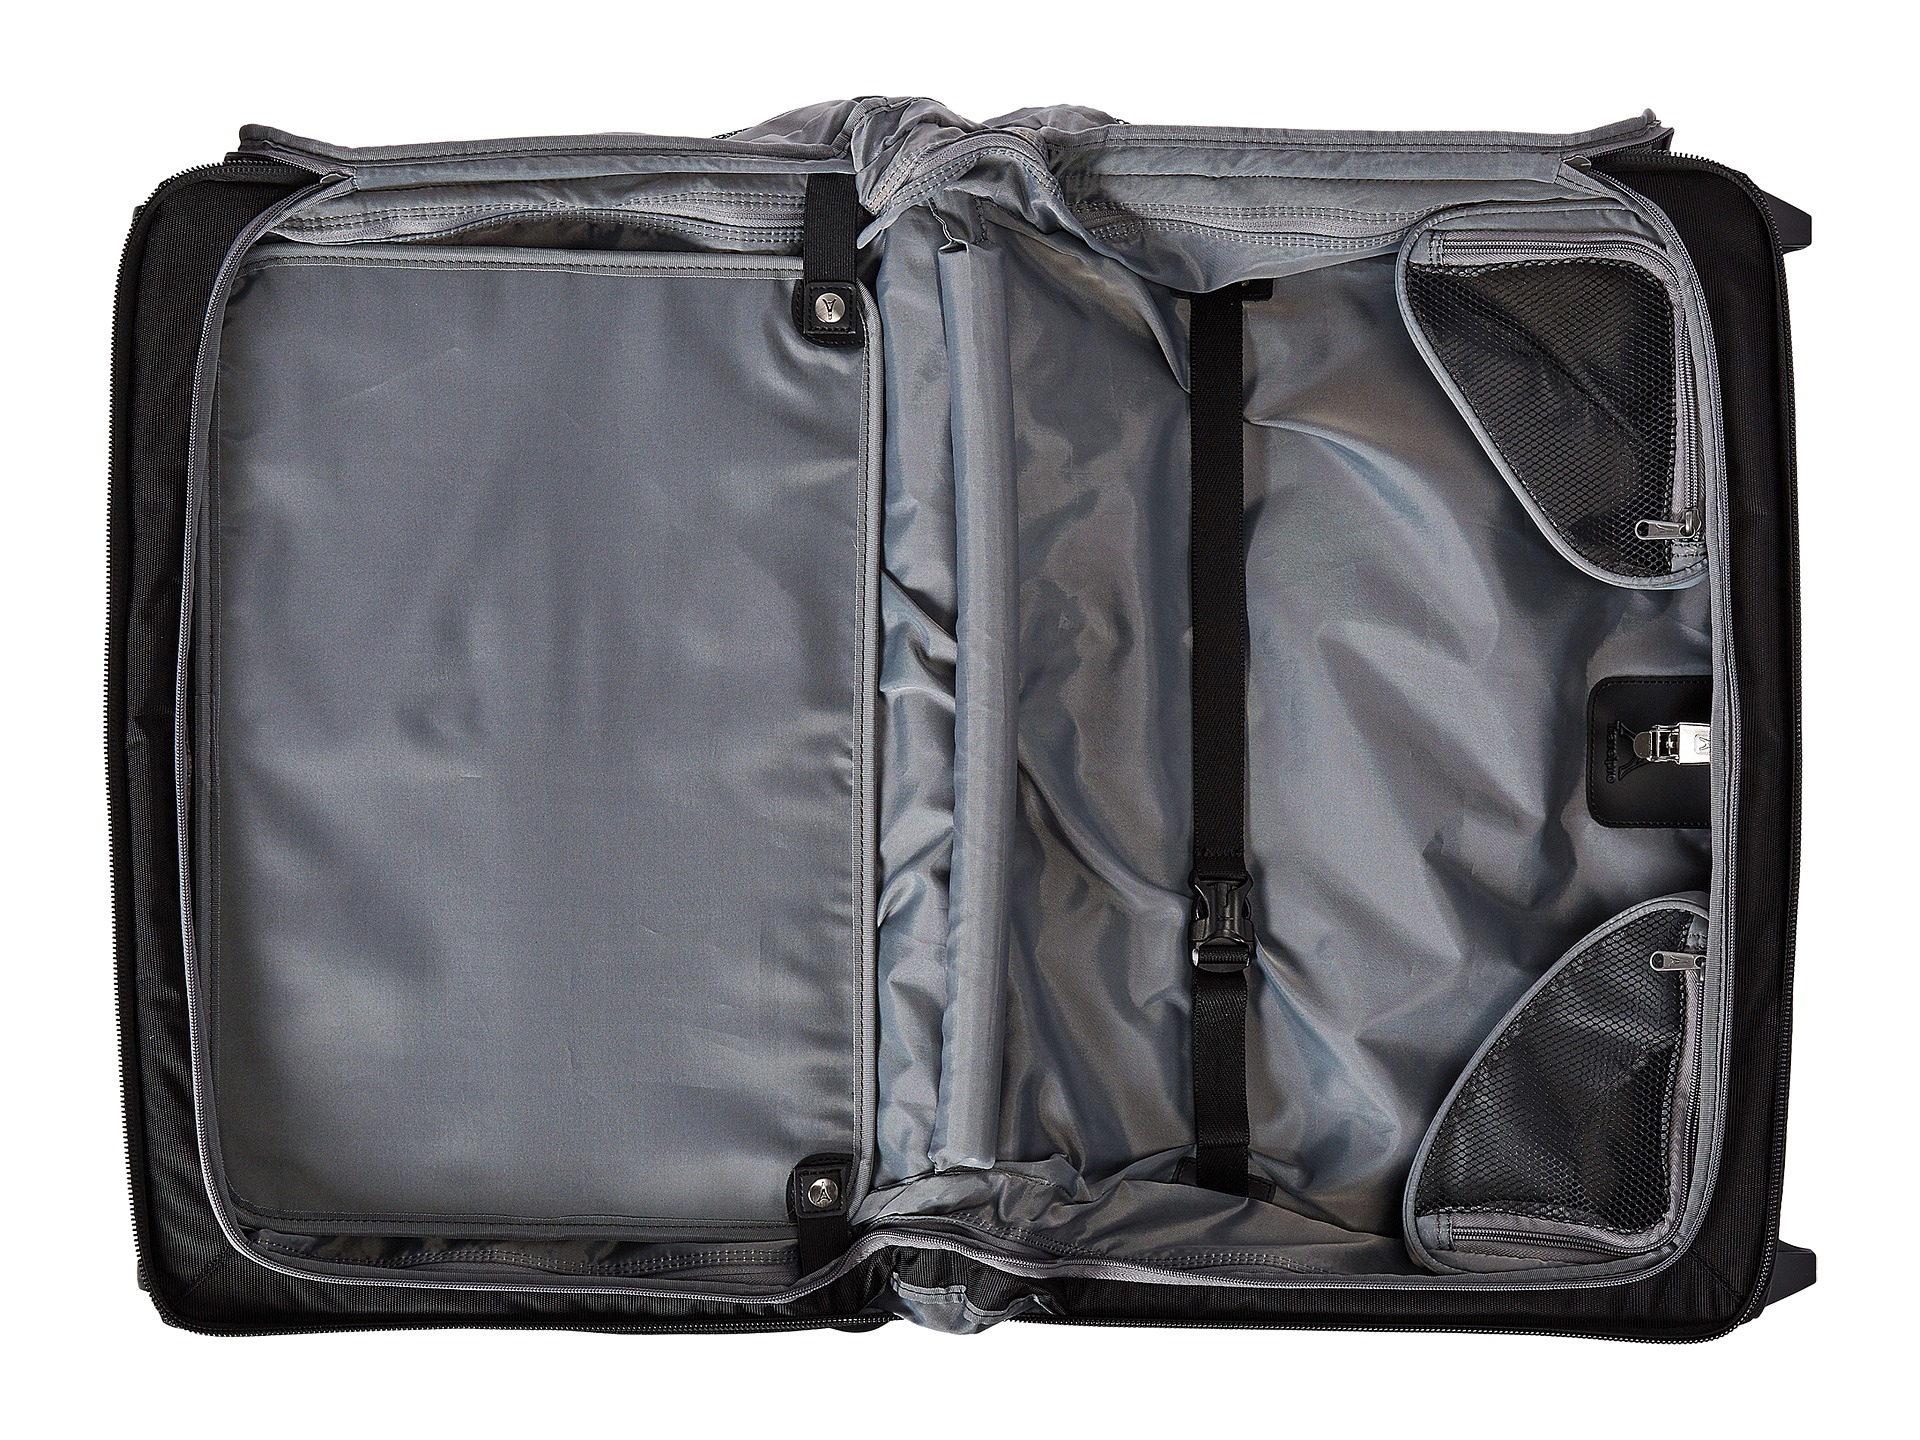 Travelpro Crew 11 - Carry-On Rolling Garment Bag - www.bagssaleusa.com Free Shipping BOTH Ways